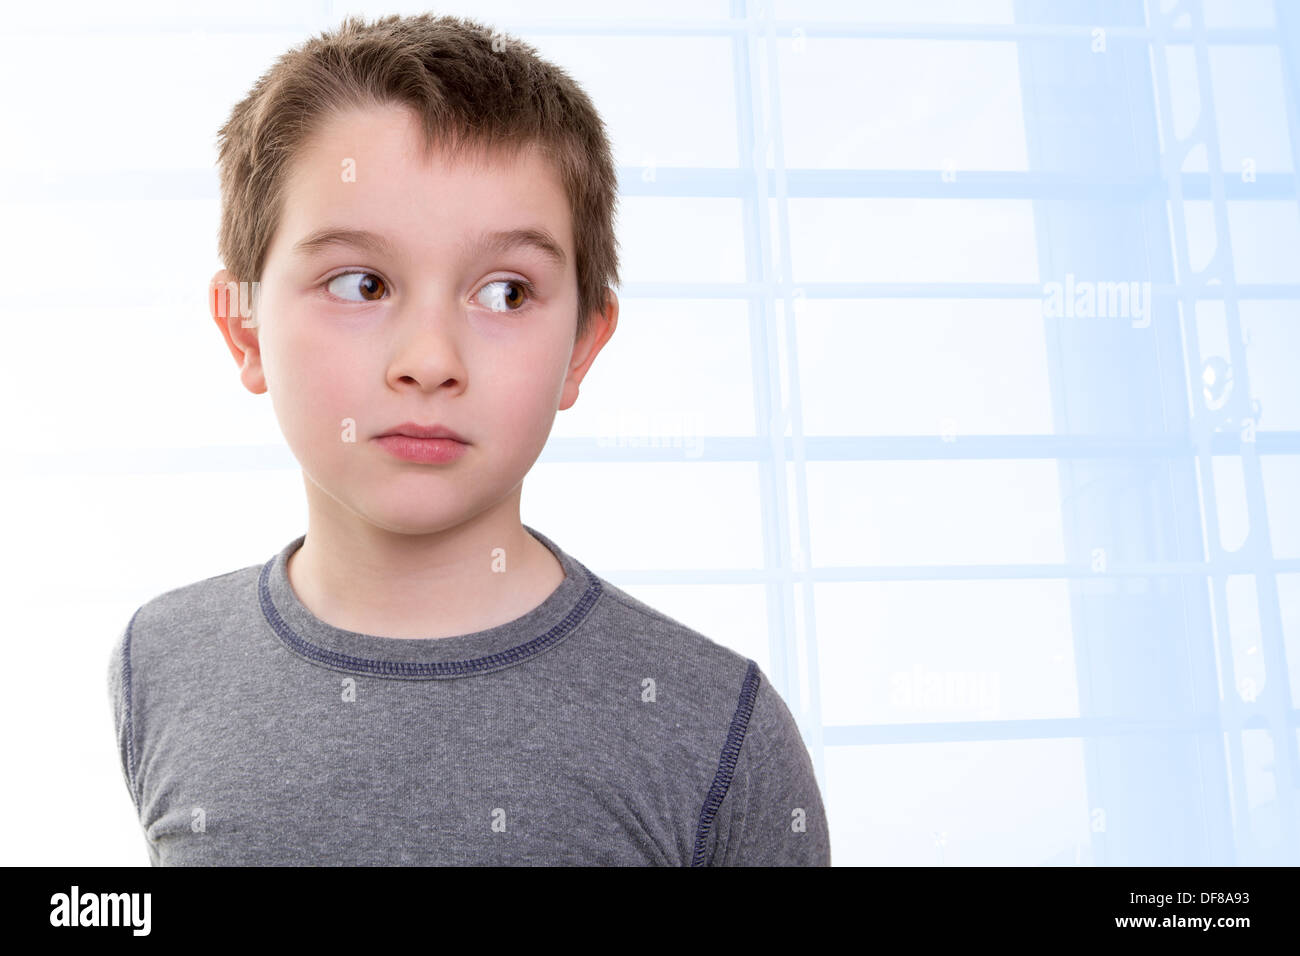 Eight years old kid looking out skeptically accusing with his big eyes Stock Photo